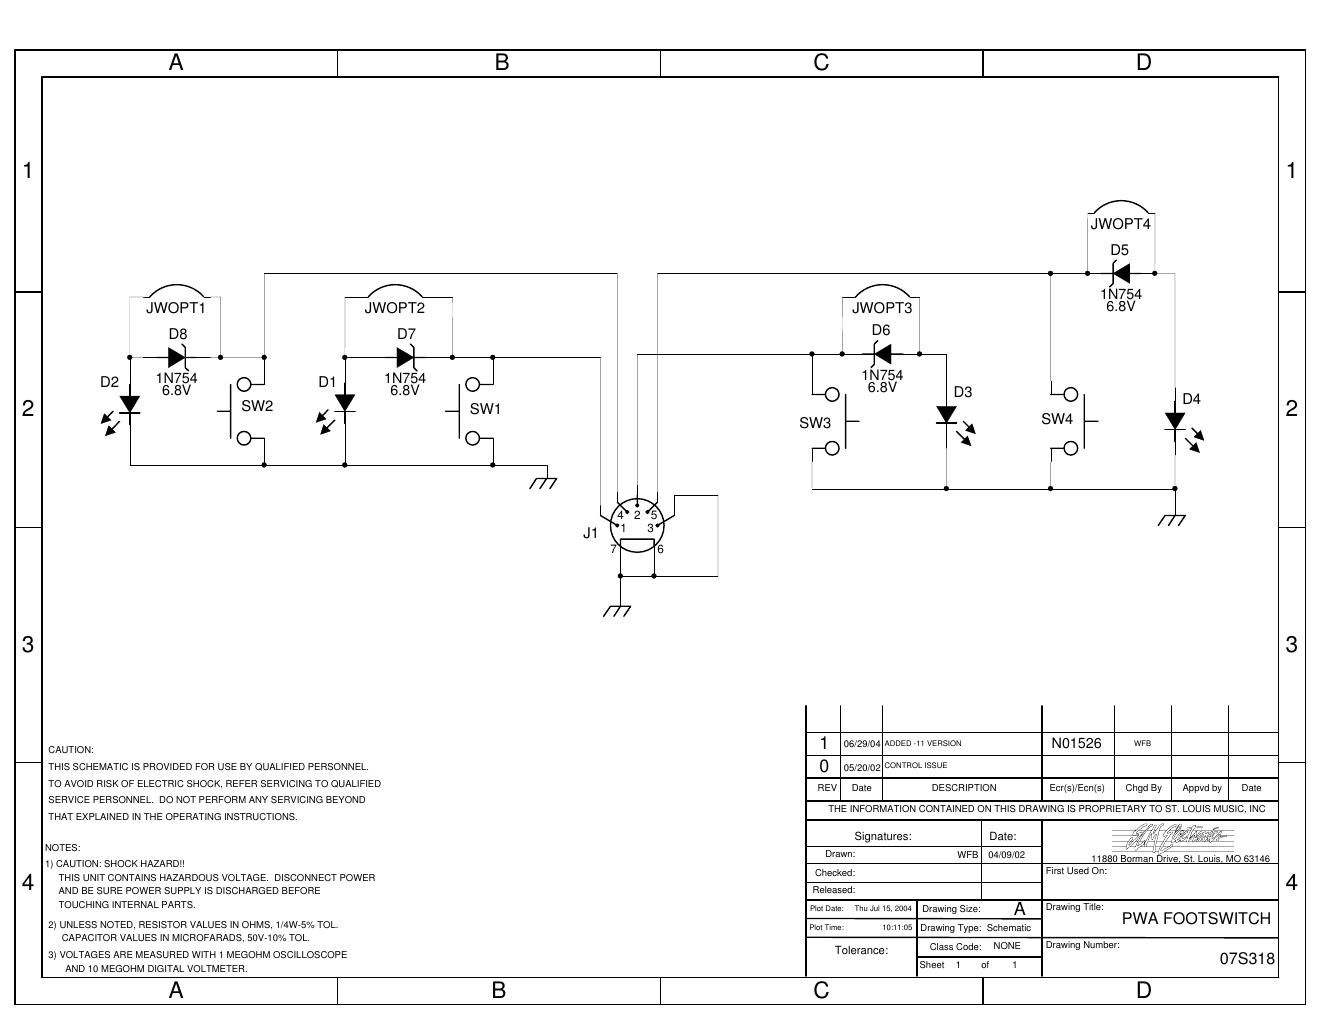 Crate BV Footswitch 07S318 Schematic